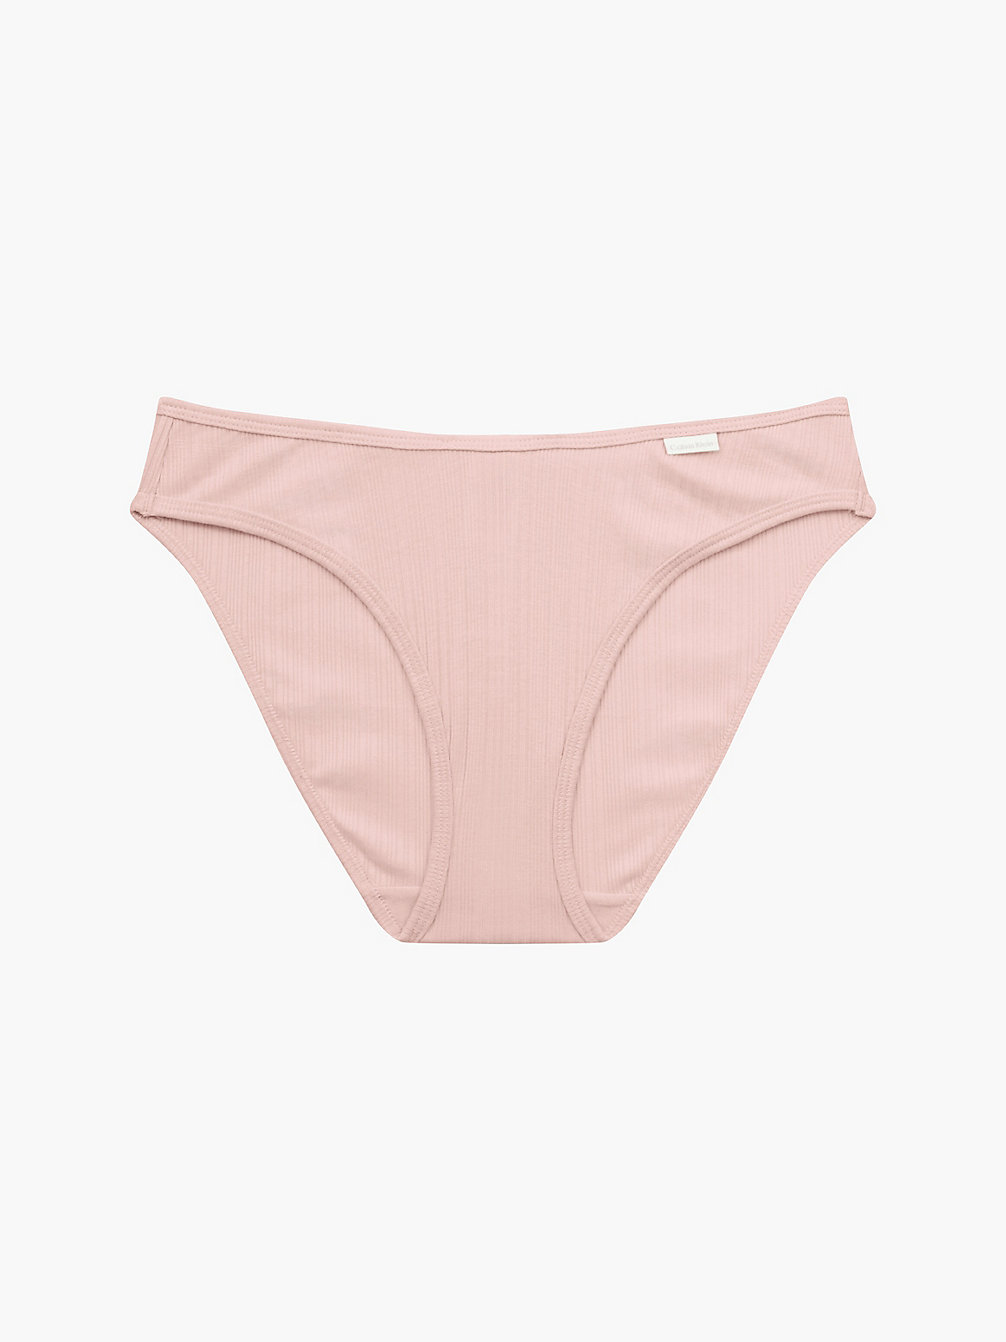 BARELY PINK > Slips - Pure Ribbed > undefined Damen - Calvin Klein